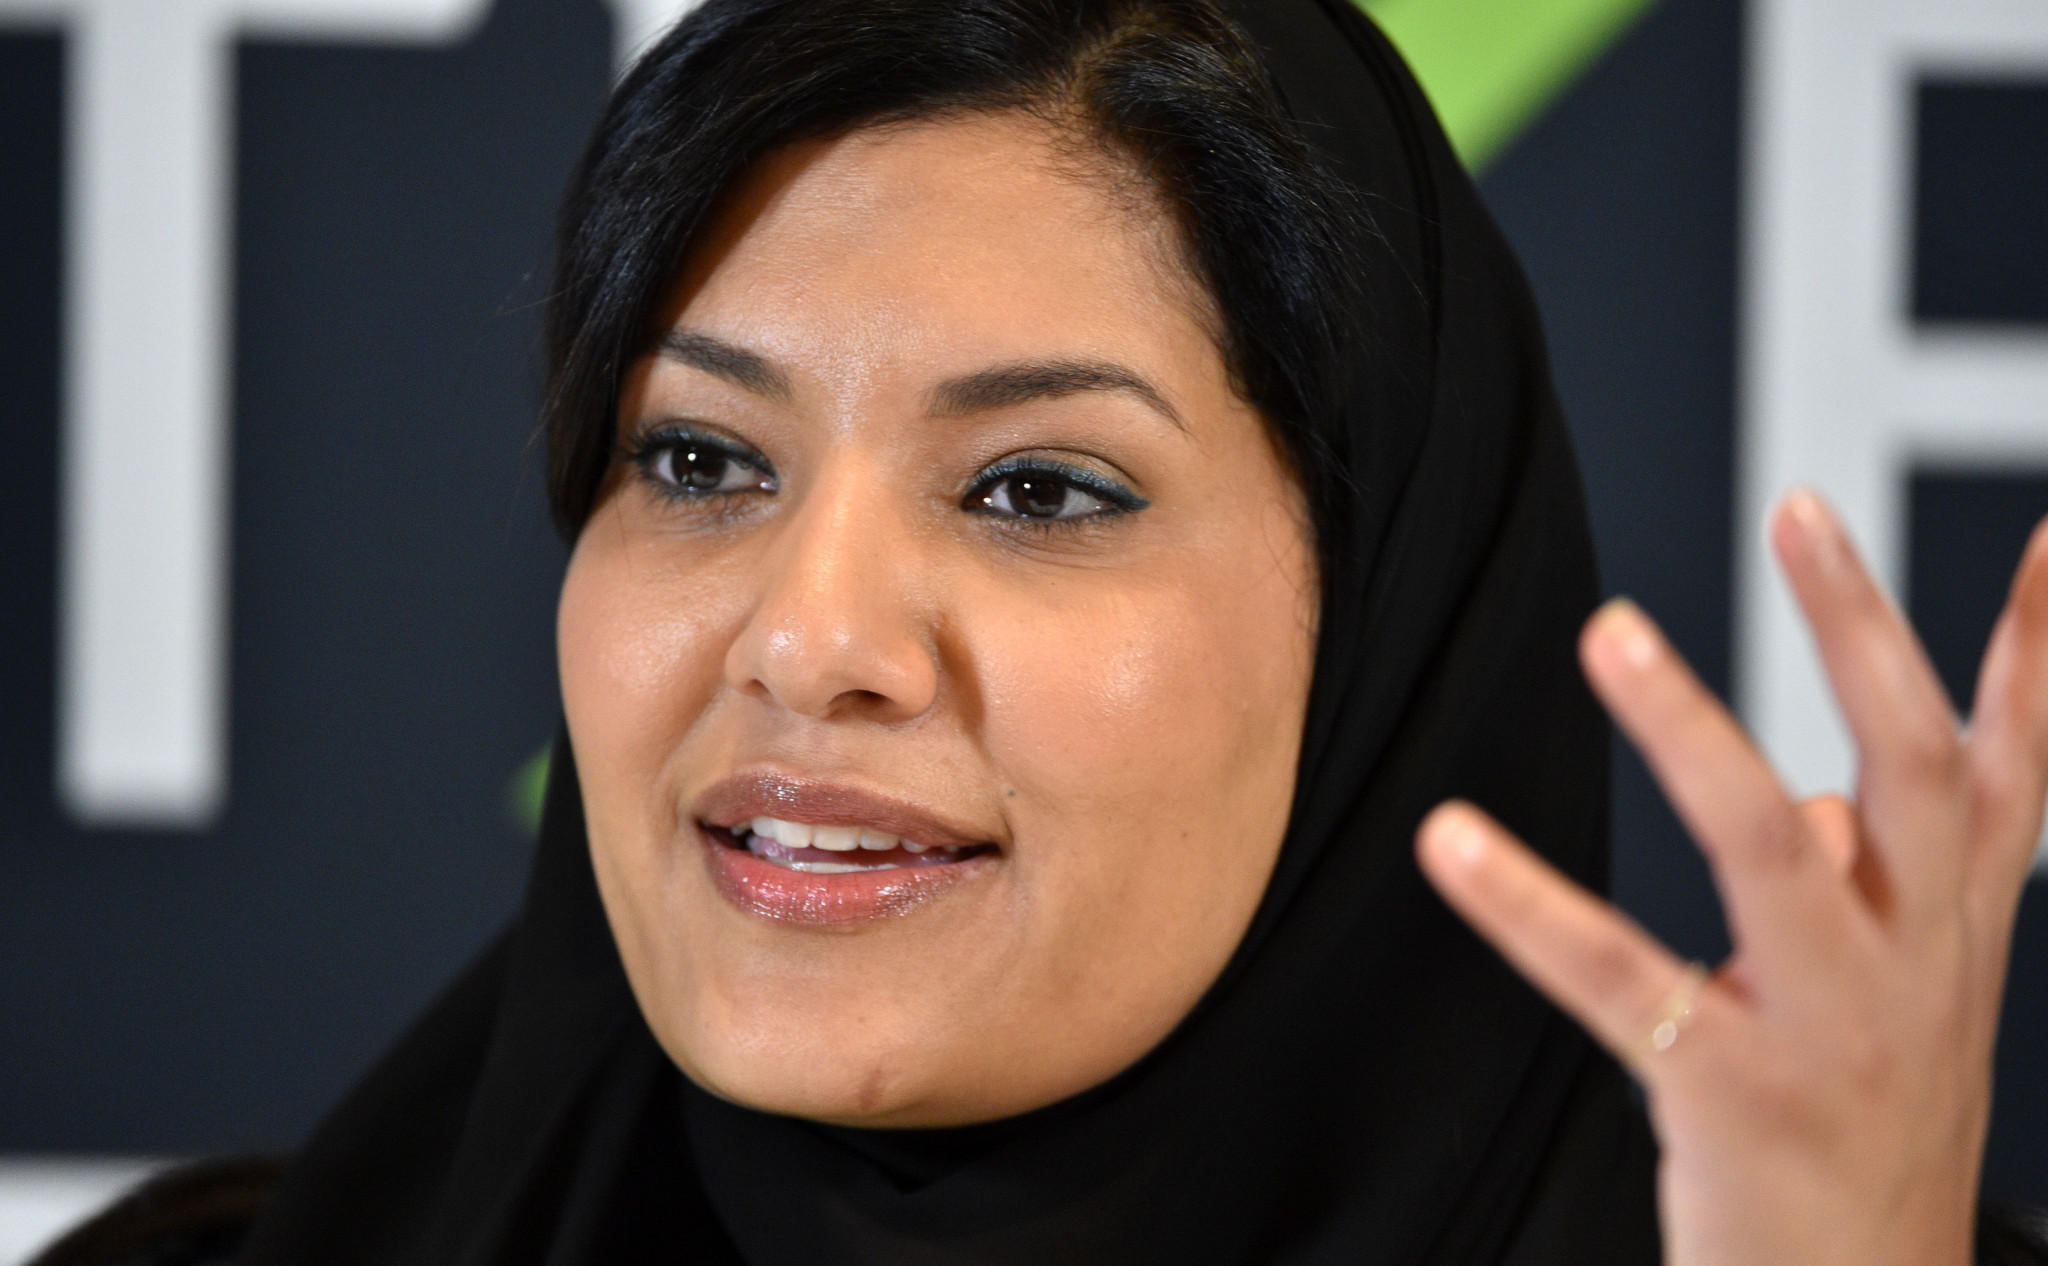 Princess Reema Bandar Al-Saud is a new entry into the IOC Twitter rankings in second place ©Getty Images